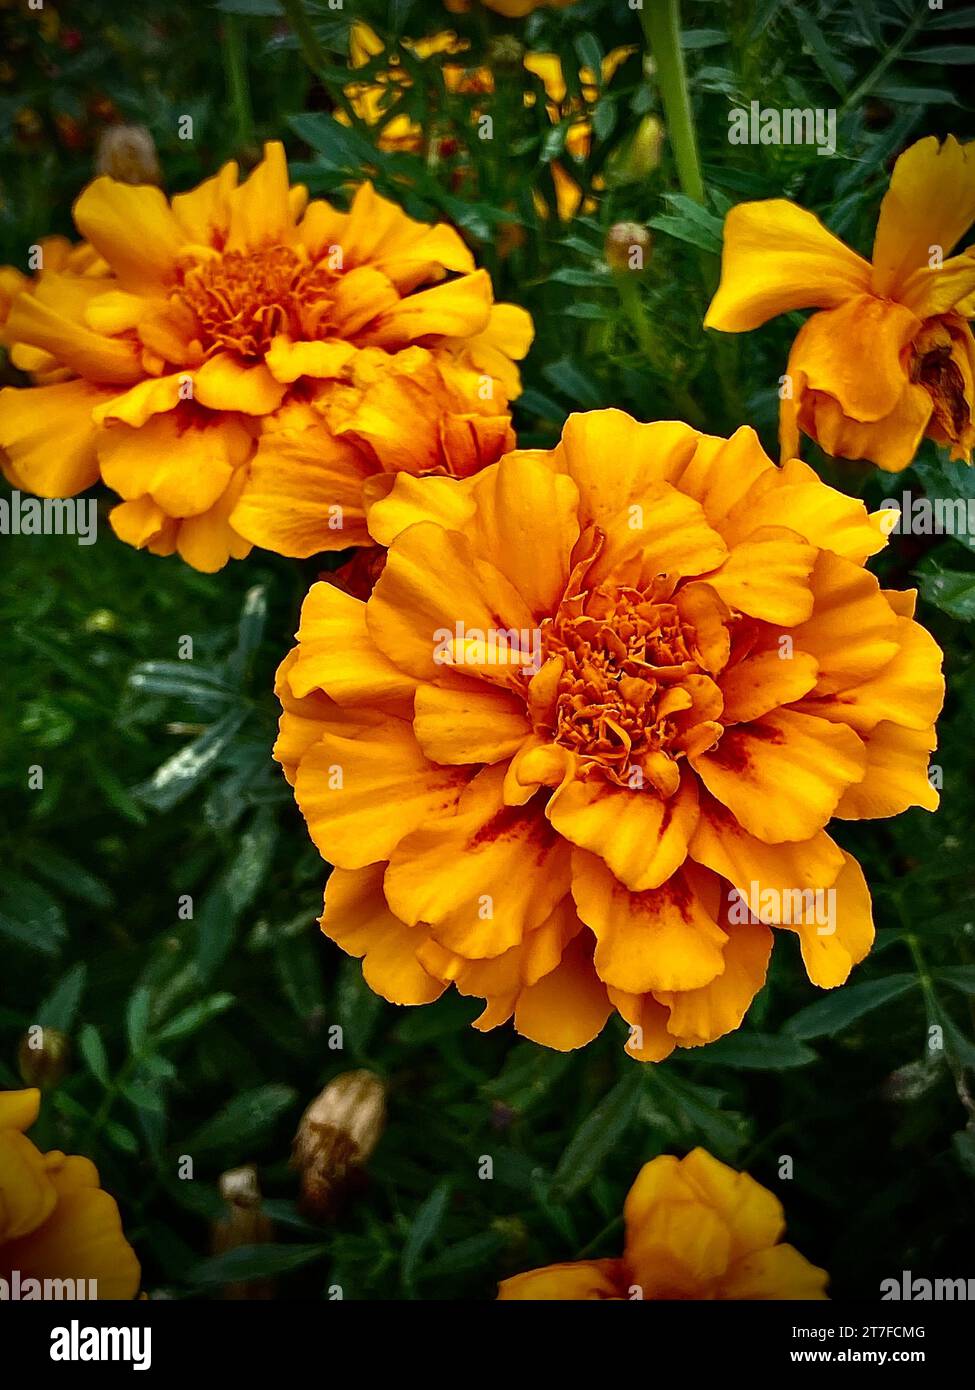 A vibrant, close-up shot of a selection of large blooming flowers in a variety of vivid colors Stock Photo